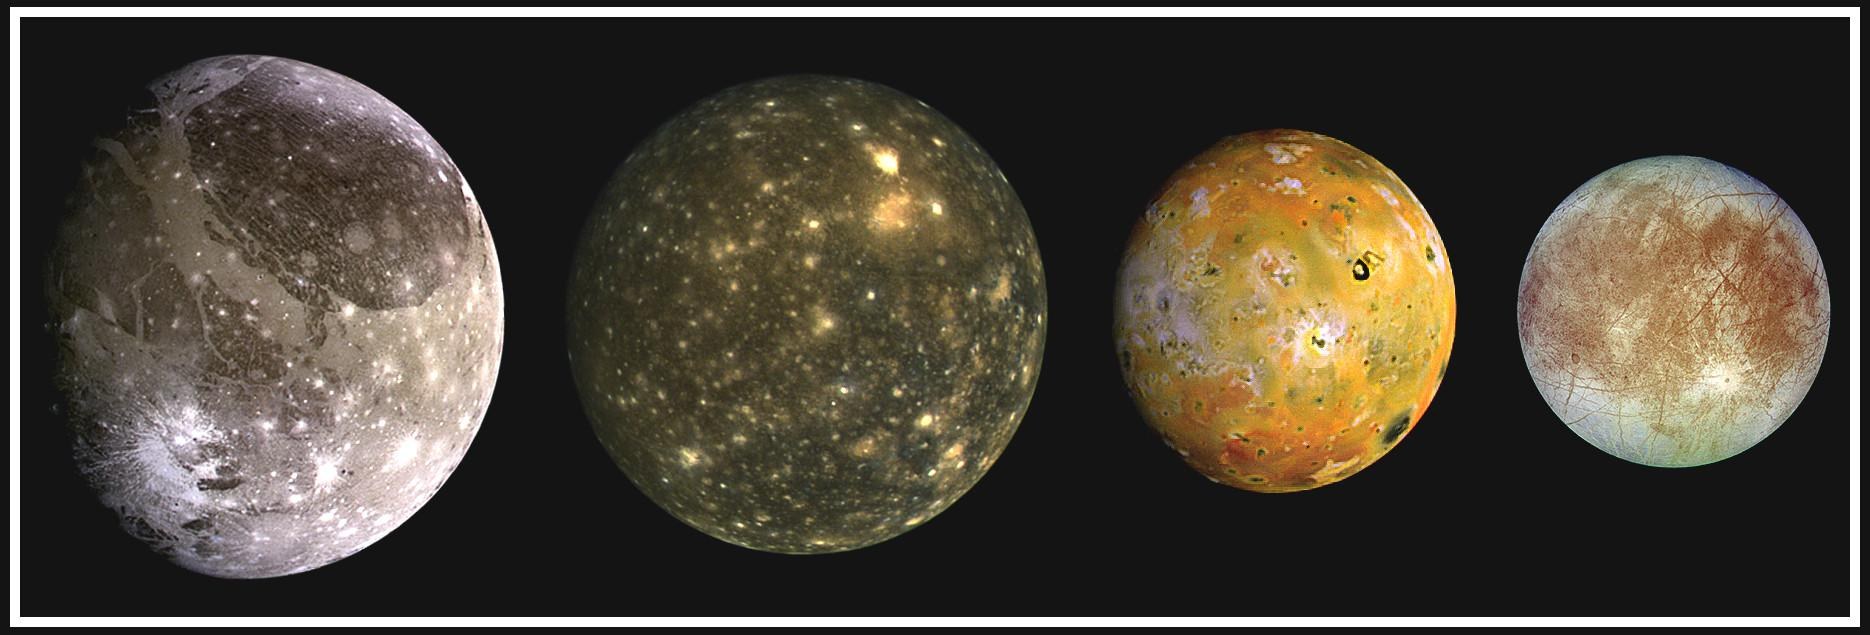 The Galilean moons